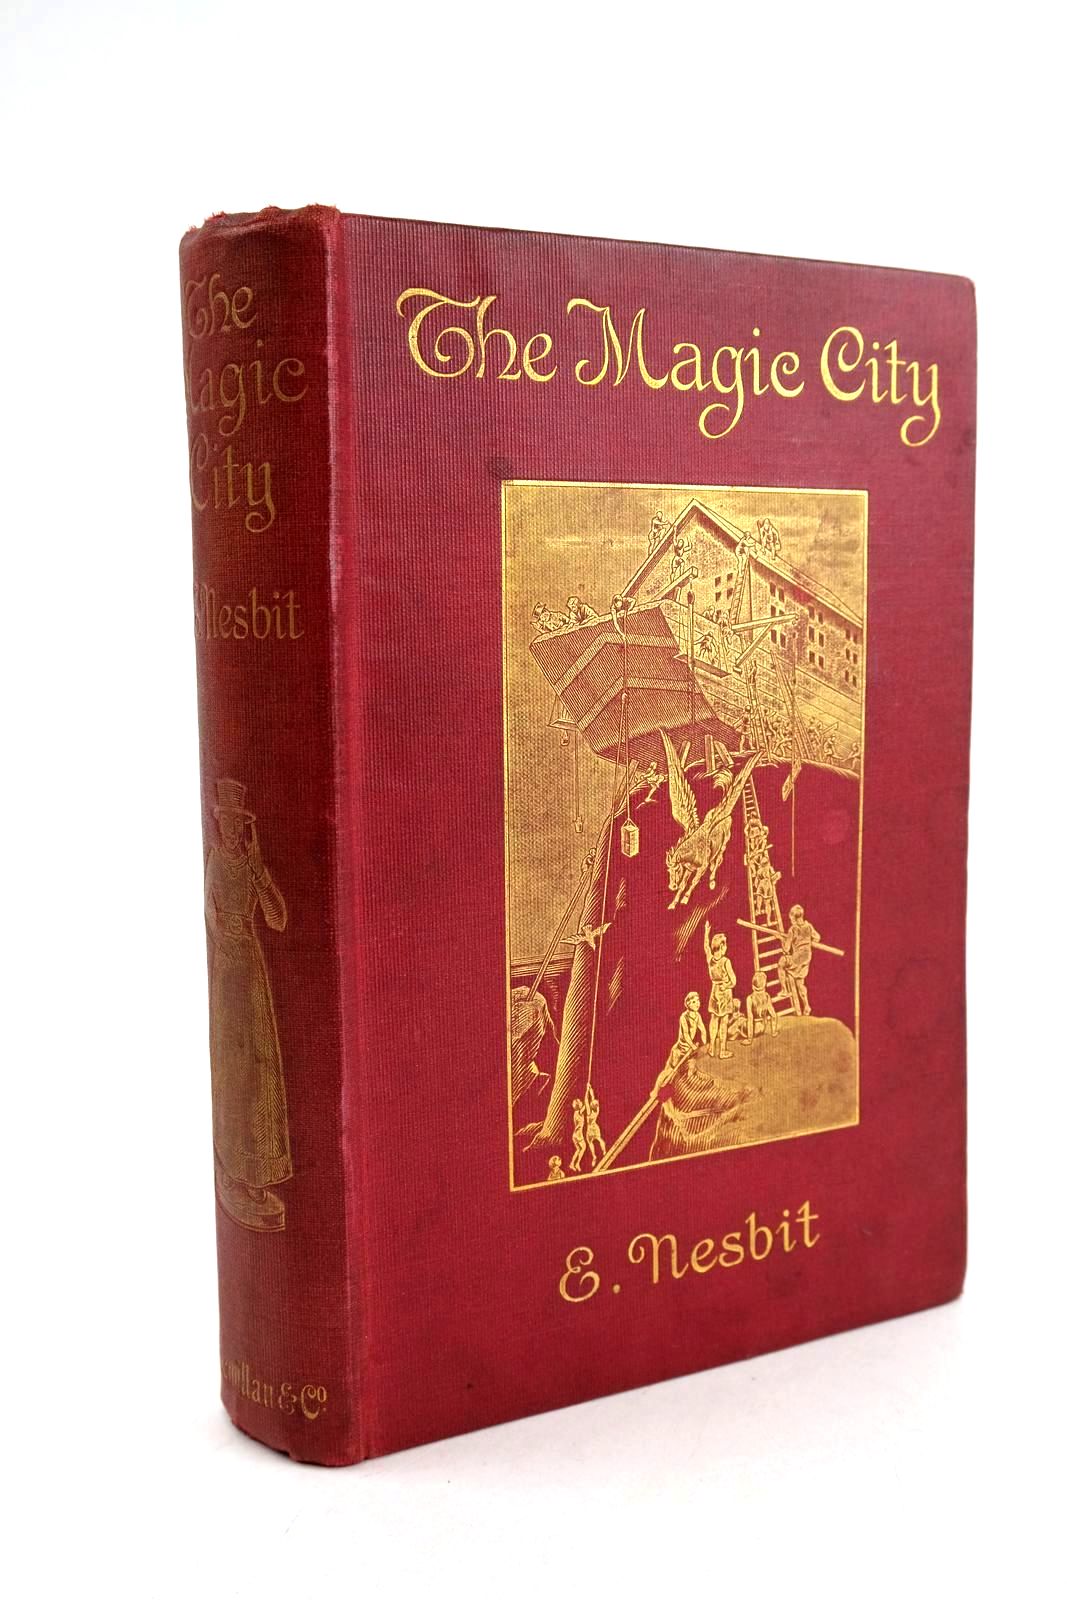 Photo of THE MAGIC CITY written by Nesbit, E. illustrated by Millar, H.R. published by Macmillan & Co. Ltd. (STOCK CODE: 1324392)  for sale by Stella & Rose's Books